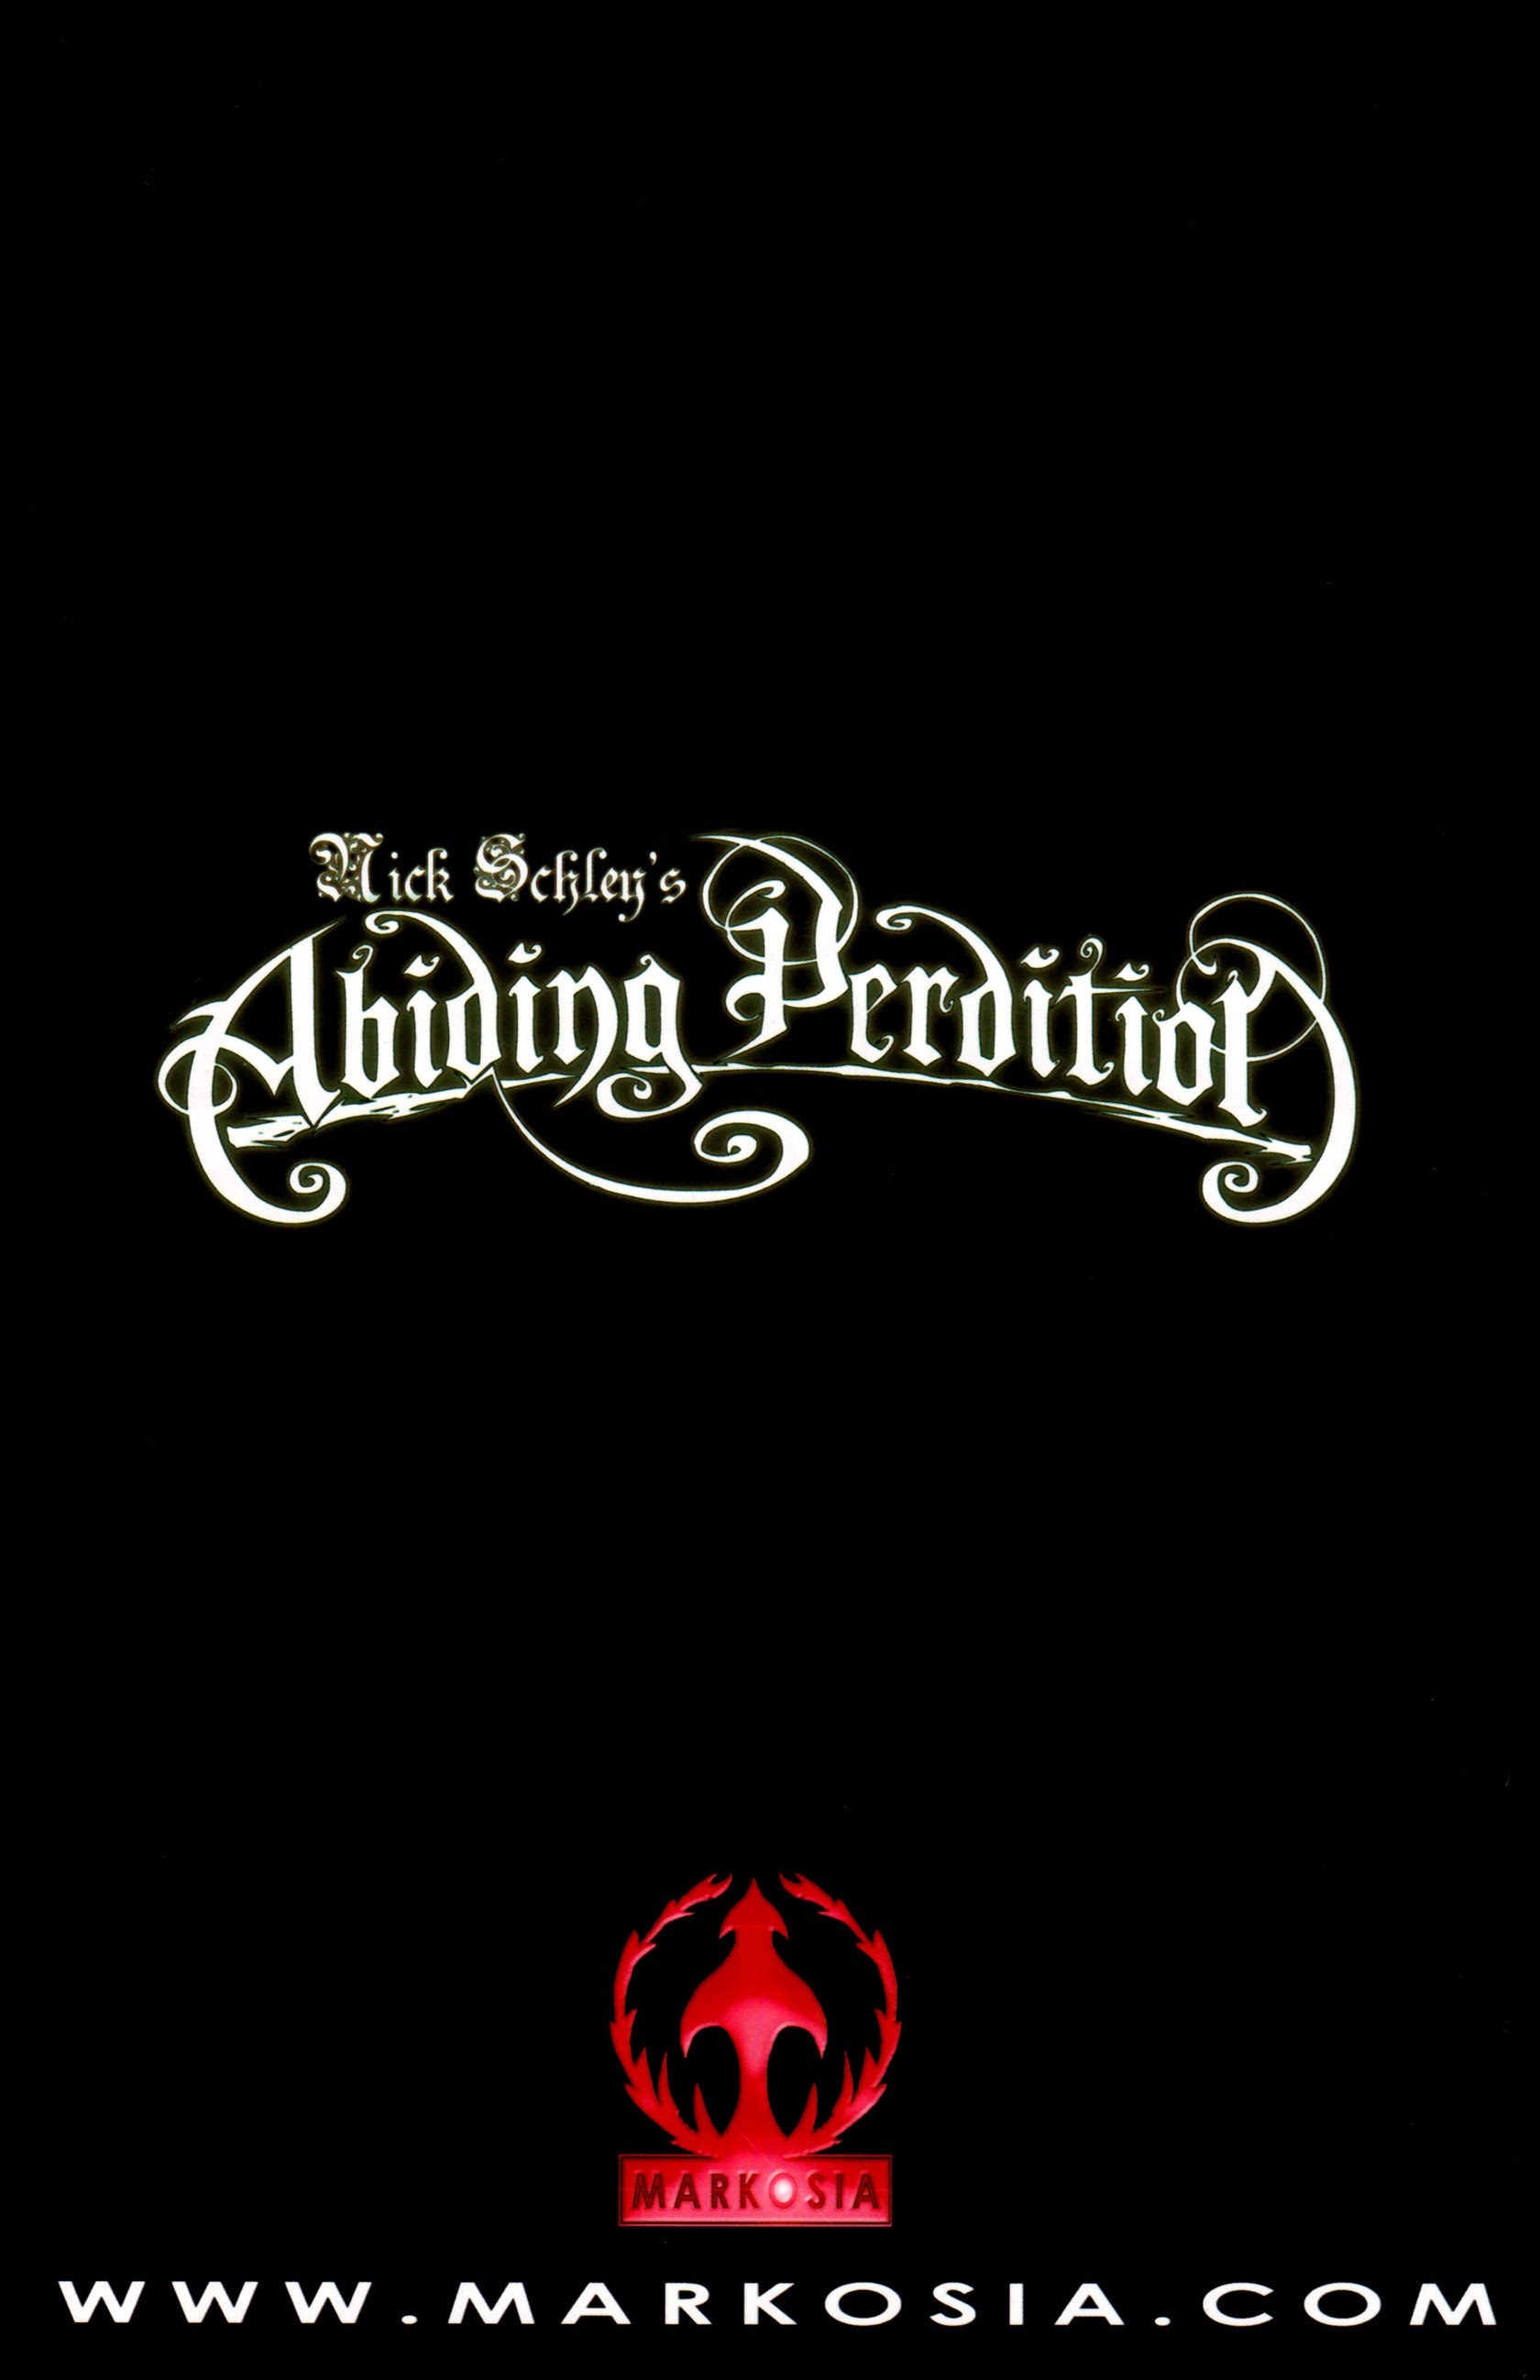 Read online Abiding Perdition comic -  Issue #5 - 36